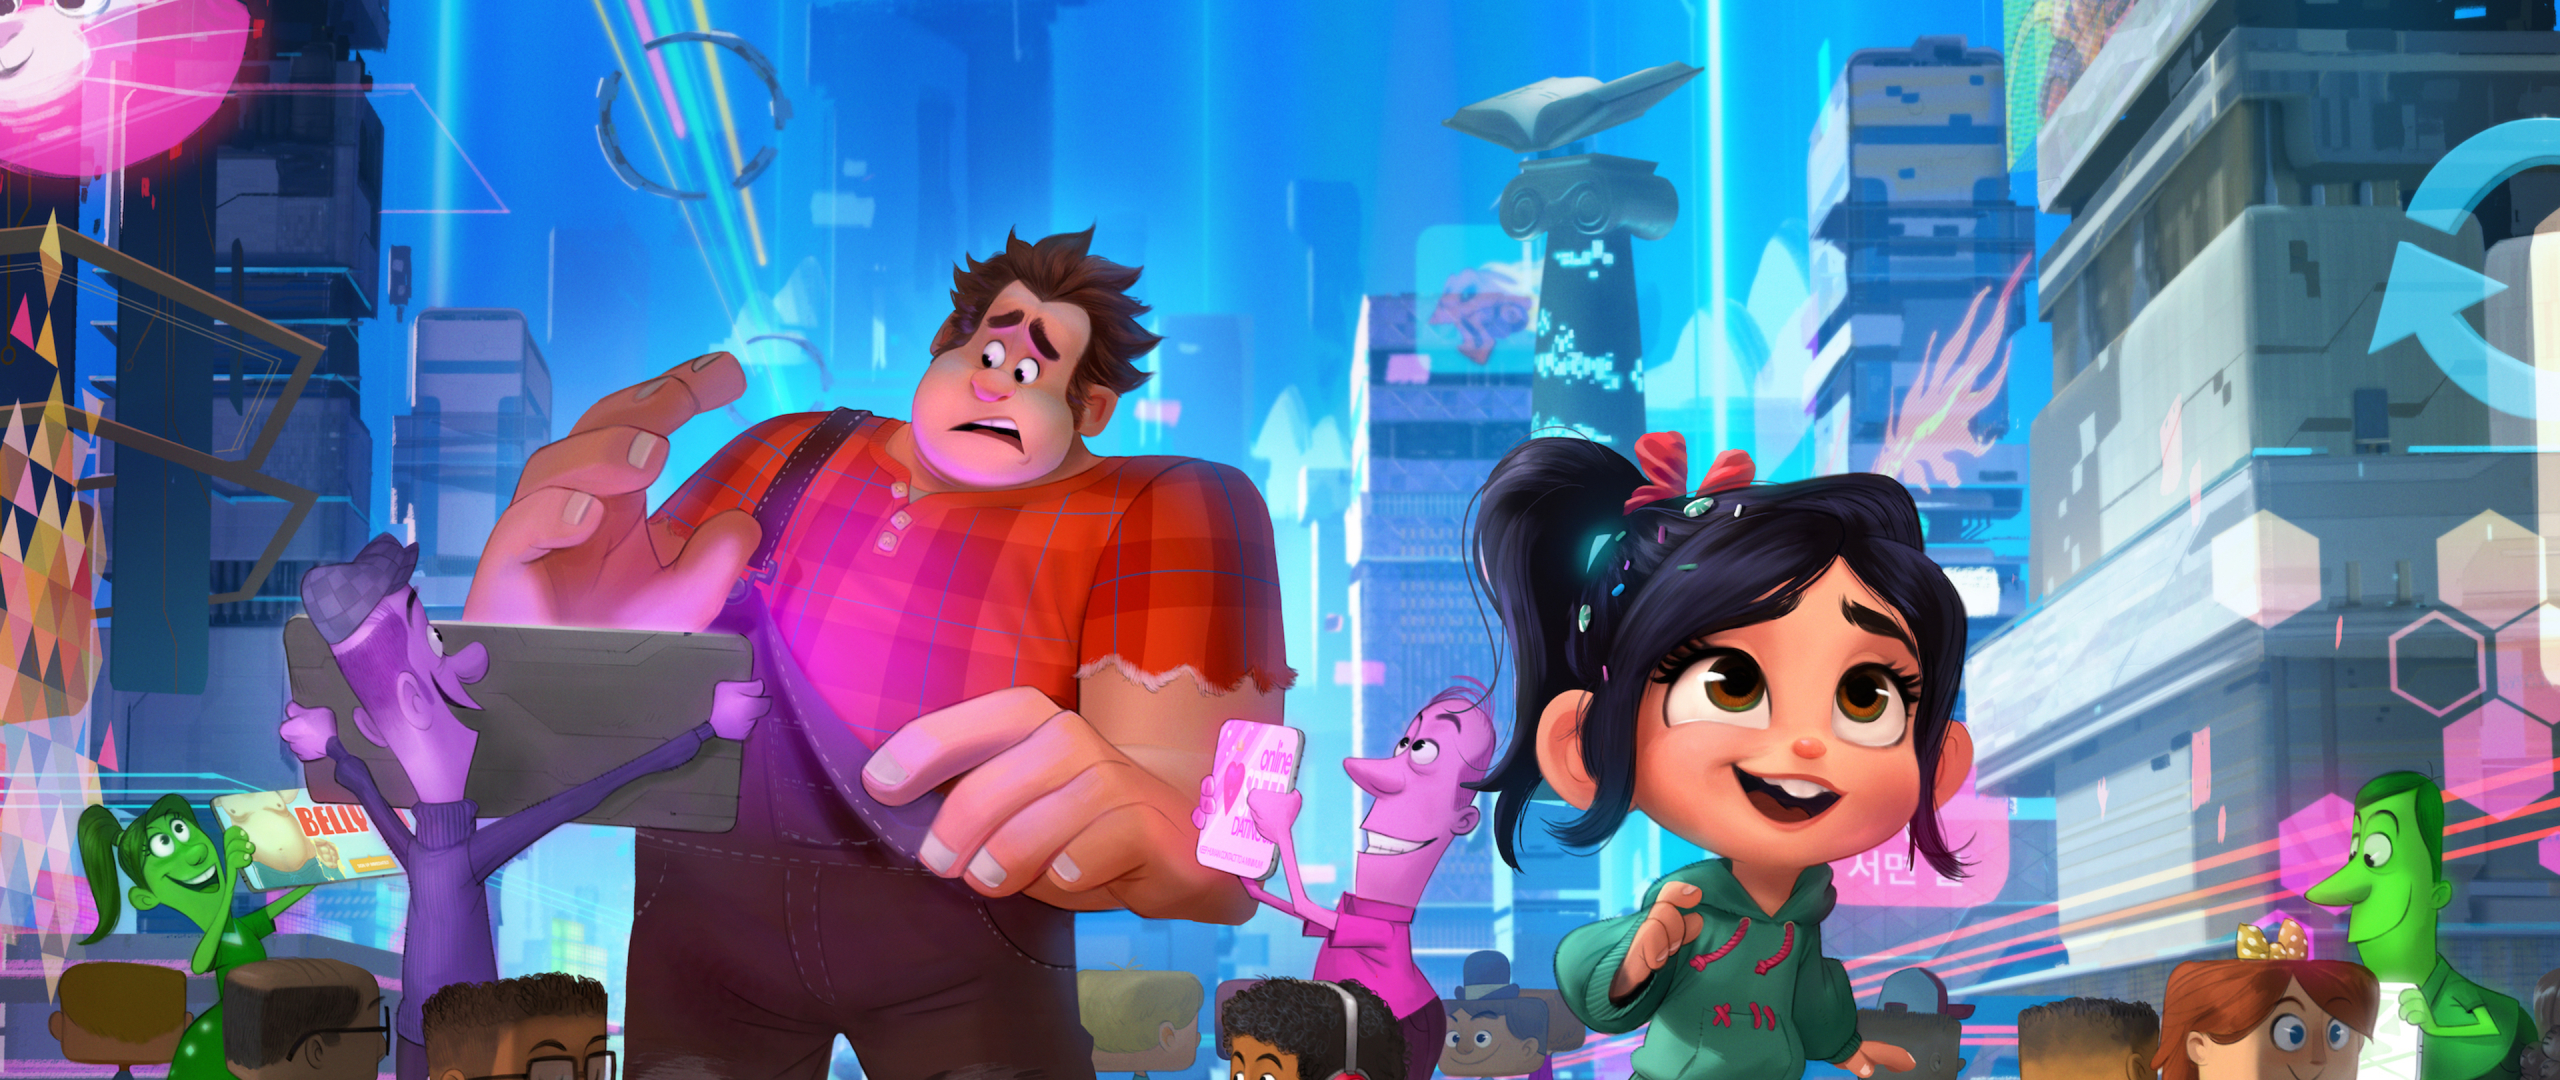 Wreck it ralph iso download pc